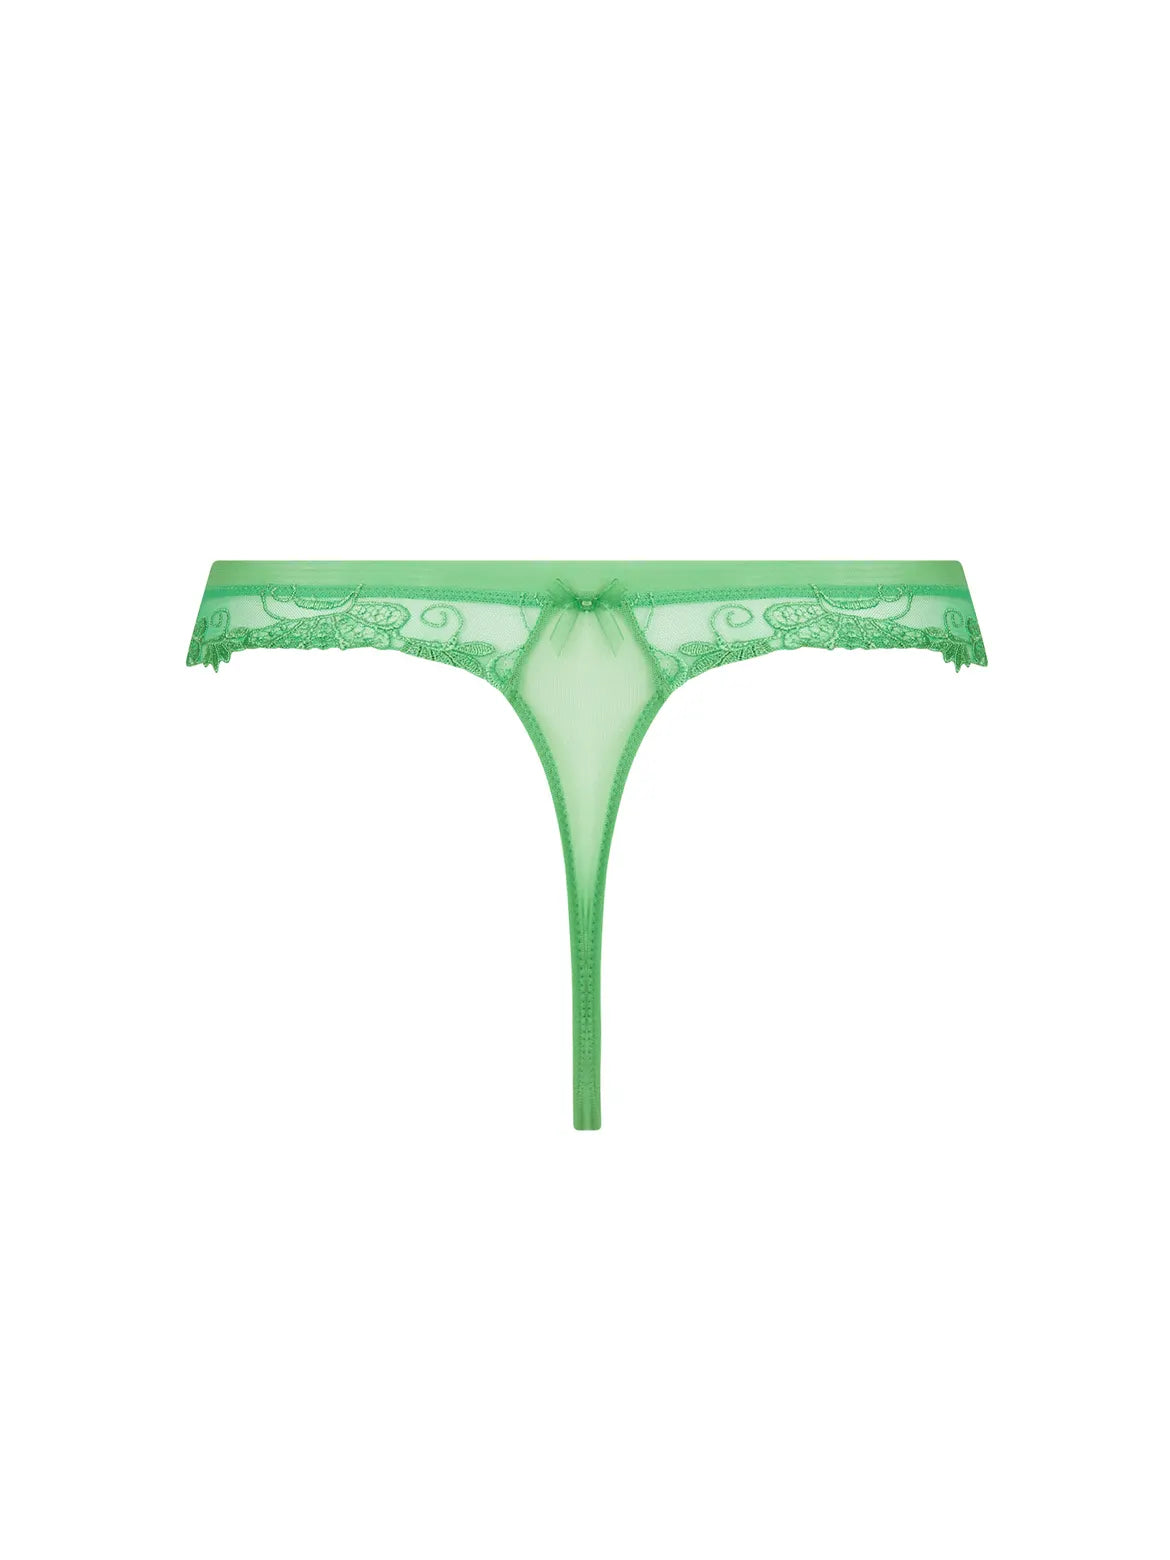 Dressing Floral in "Emeraude" Thong By Lise Charmel - S-XXL